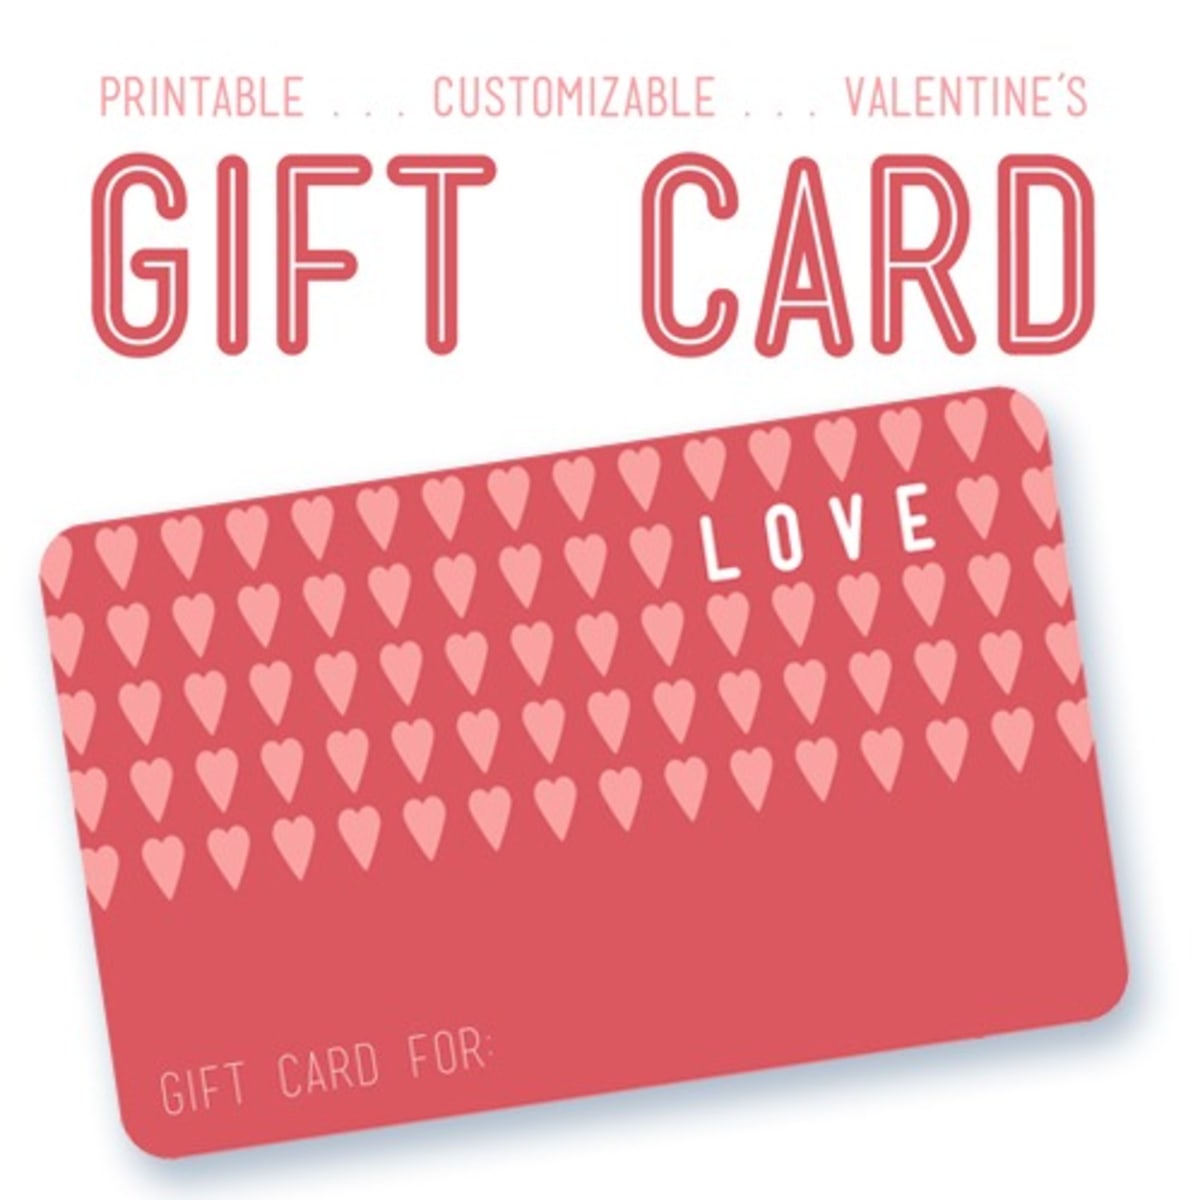 Free Gift Certificate Templates For Valentines Day | Gift Card Suite